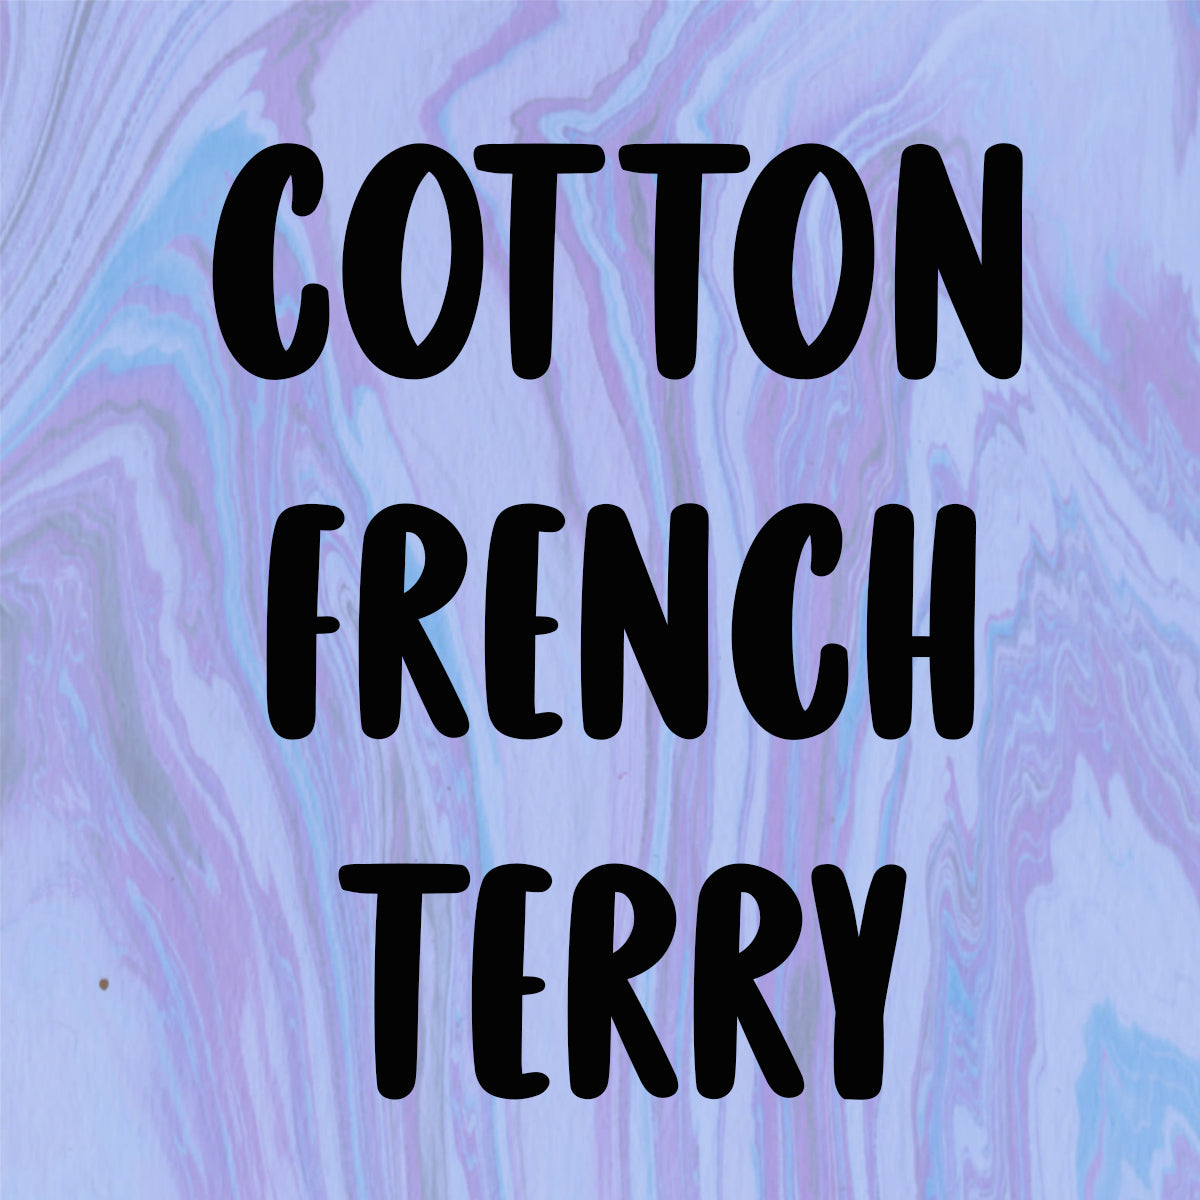 COTTON FRENCH TERRY *COTTONS*